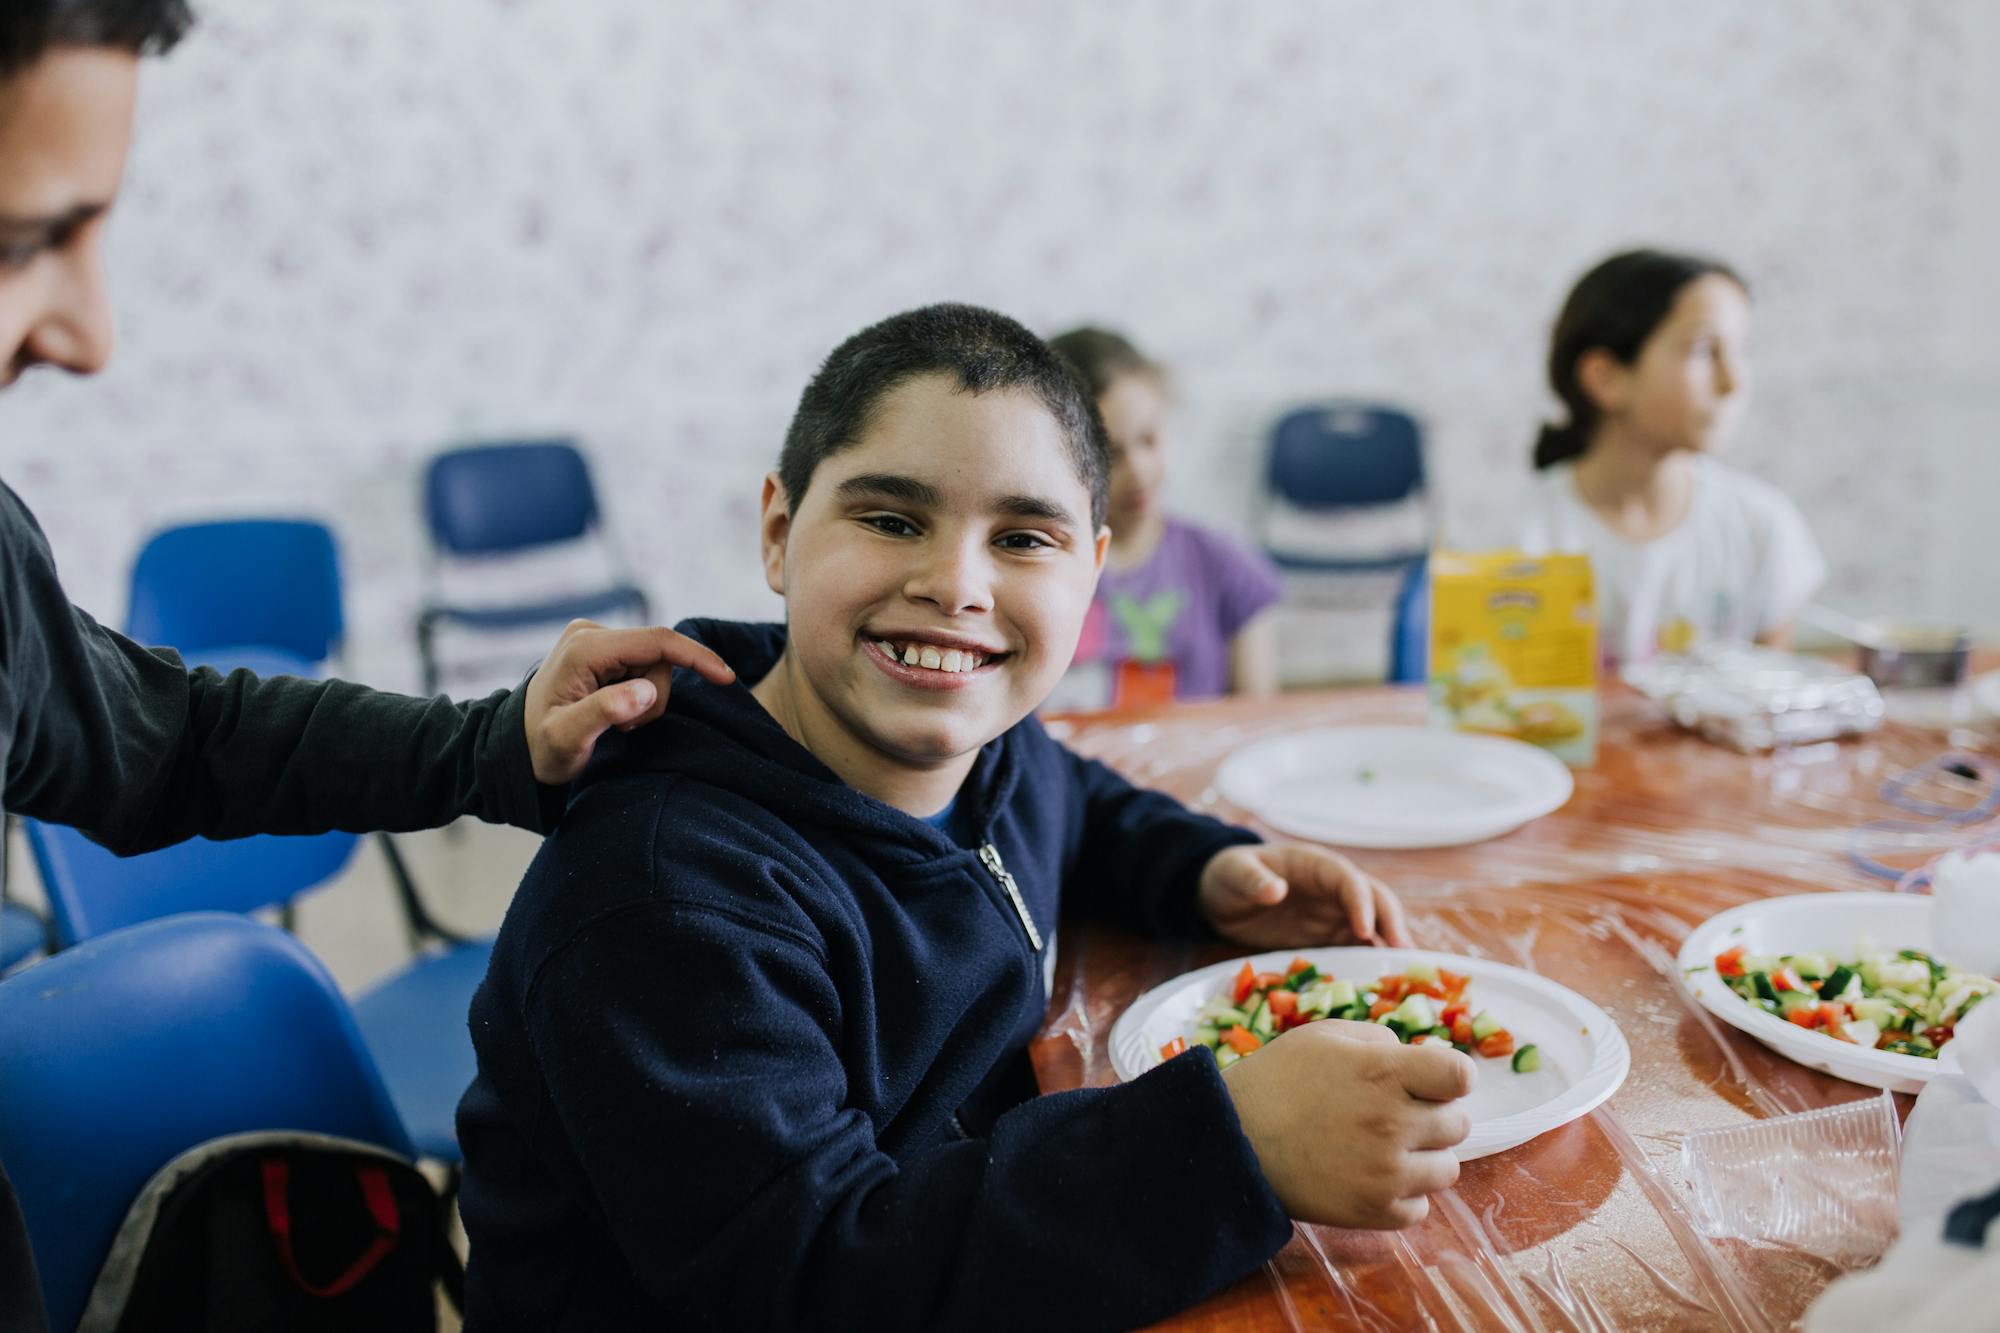 Feeding Programs for Schools & Children with Special Needs